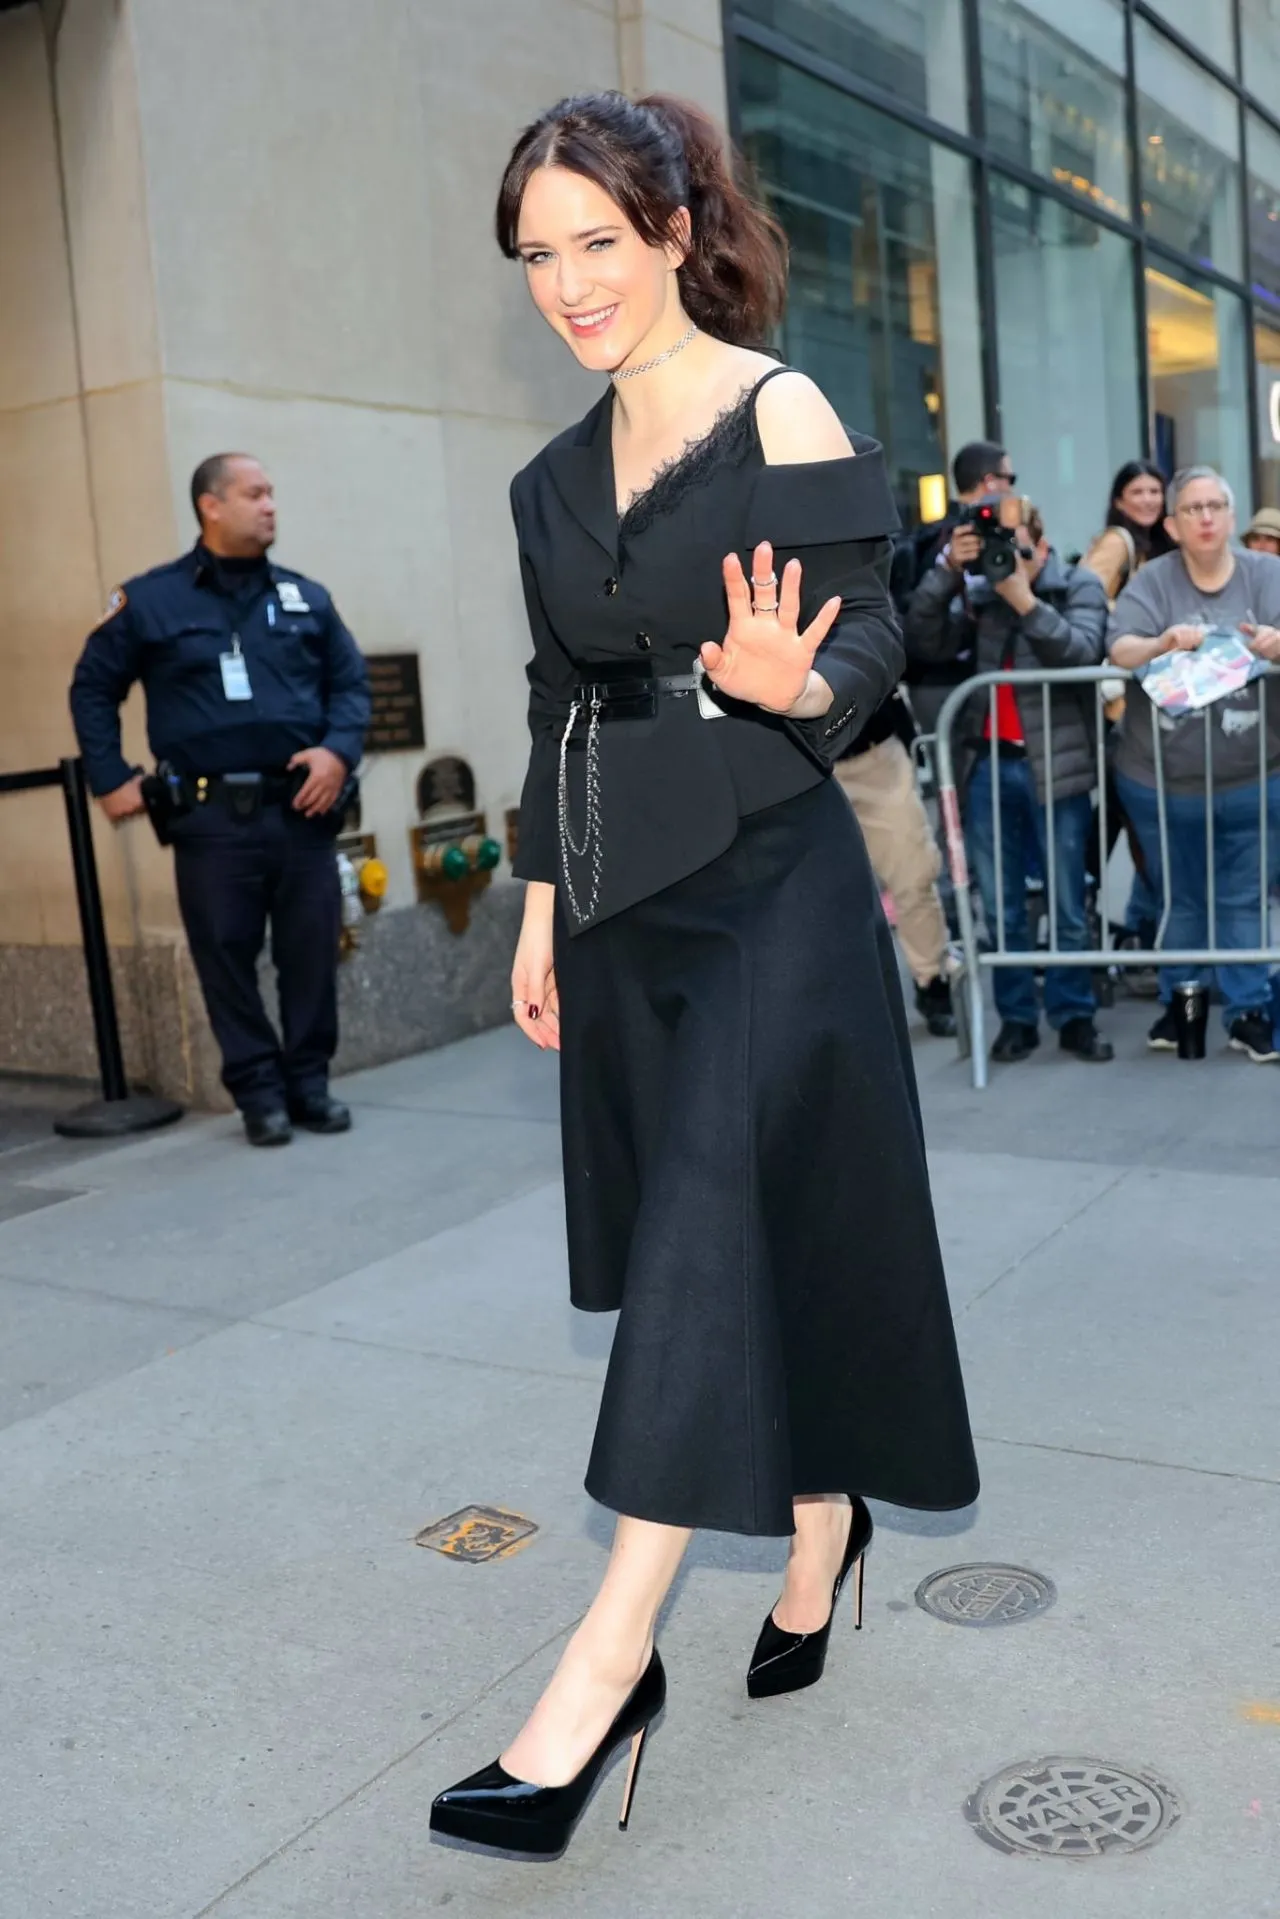 RACHEL BROSNAHAN AT ARRIVES AT THE TODAY SHOW IN NEW YORK CITY11